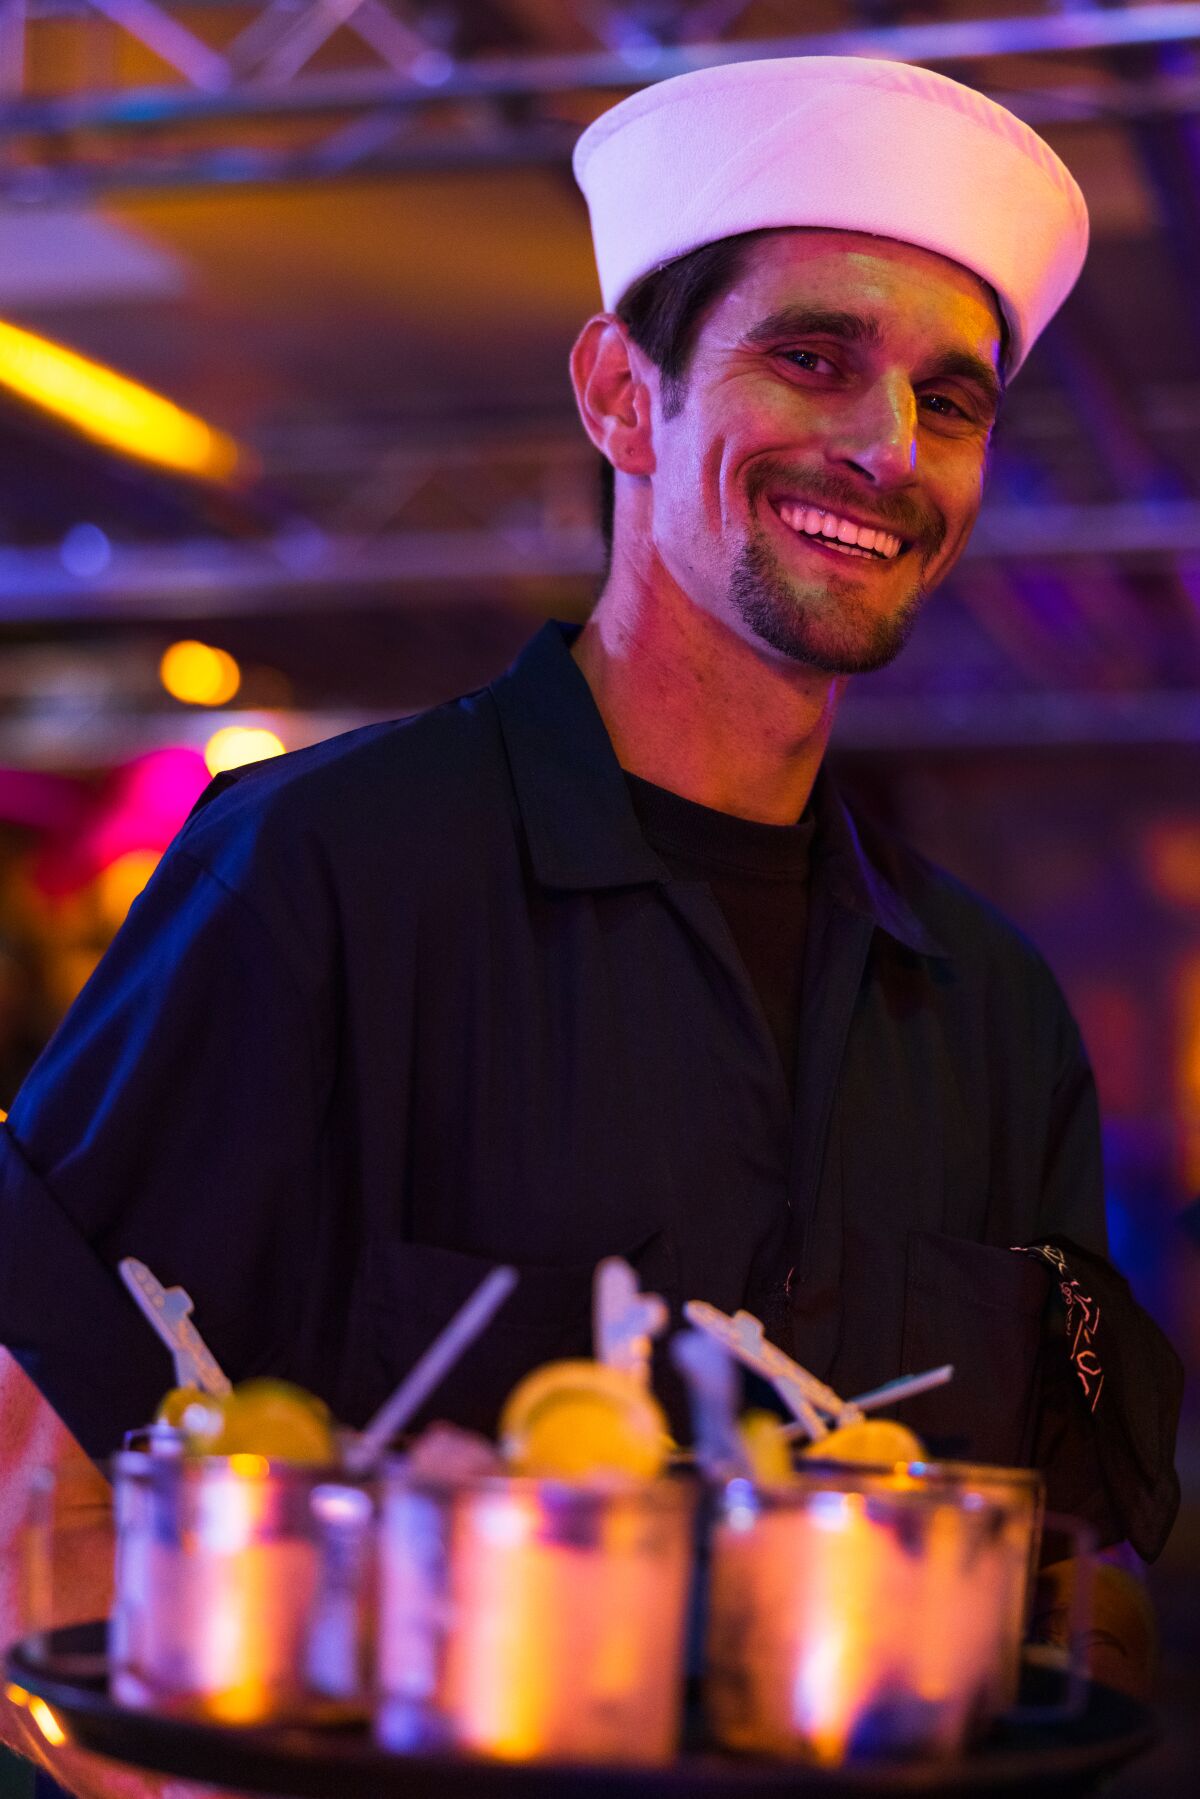 A server at the Acey-Doucey Club, a pop-up submarine tiki bar experience in the Gaslamp Quarter through June 26.